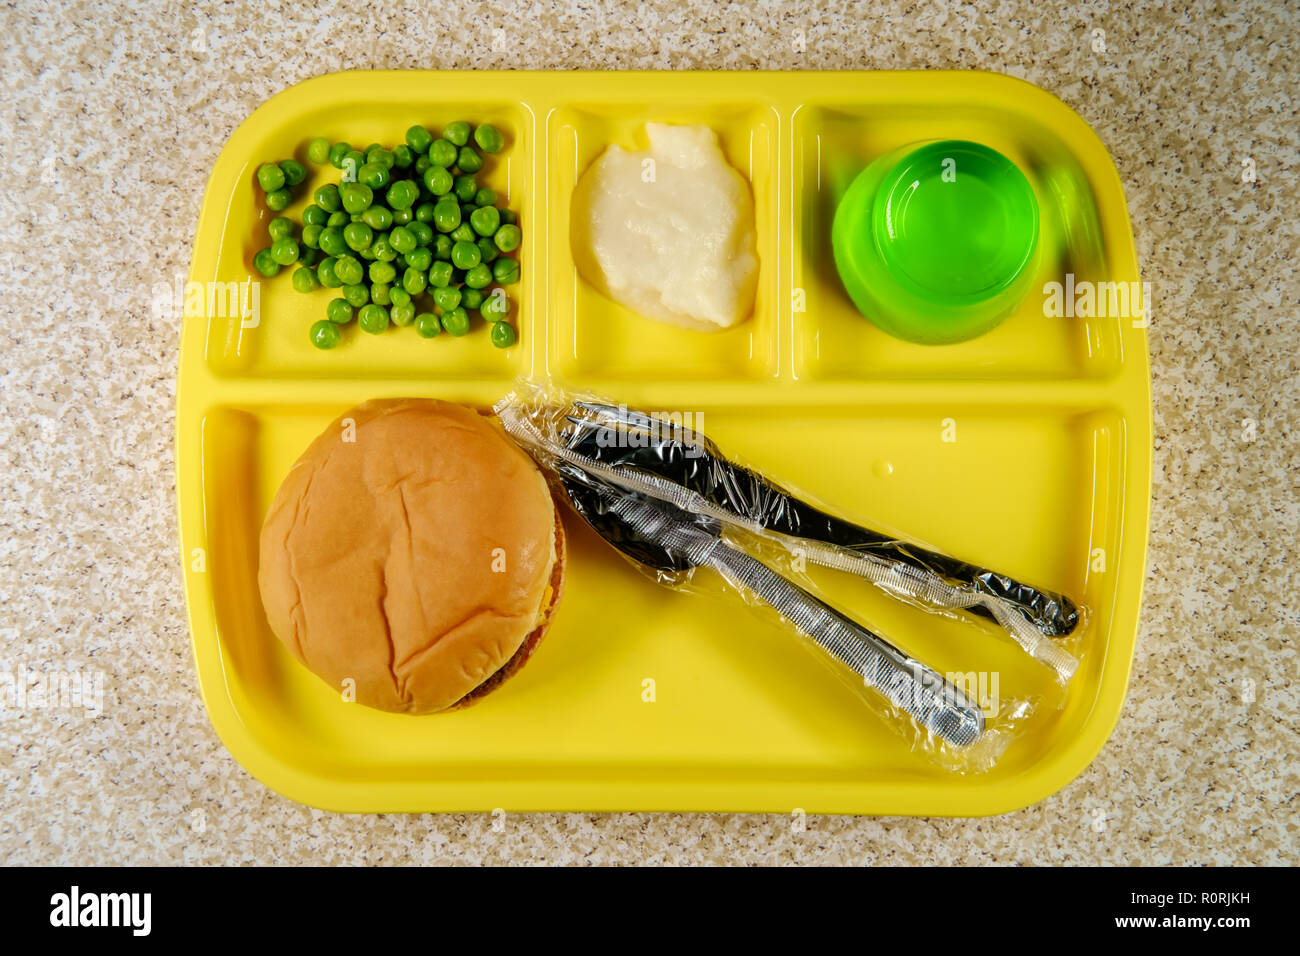 Elementary school lunch cheeseburger with mashed potatoes gelatin and green peas on portion tray Stock Photo